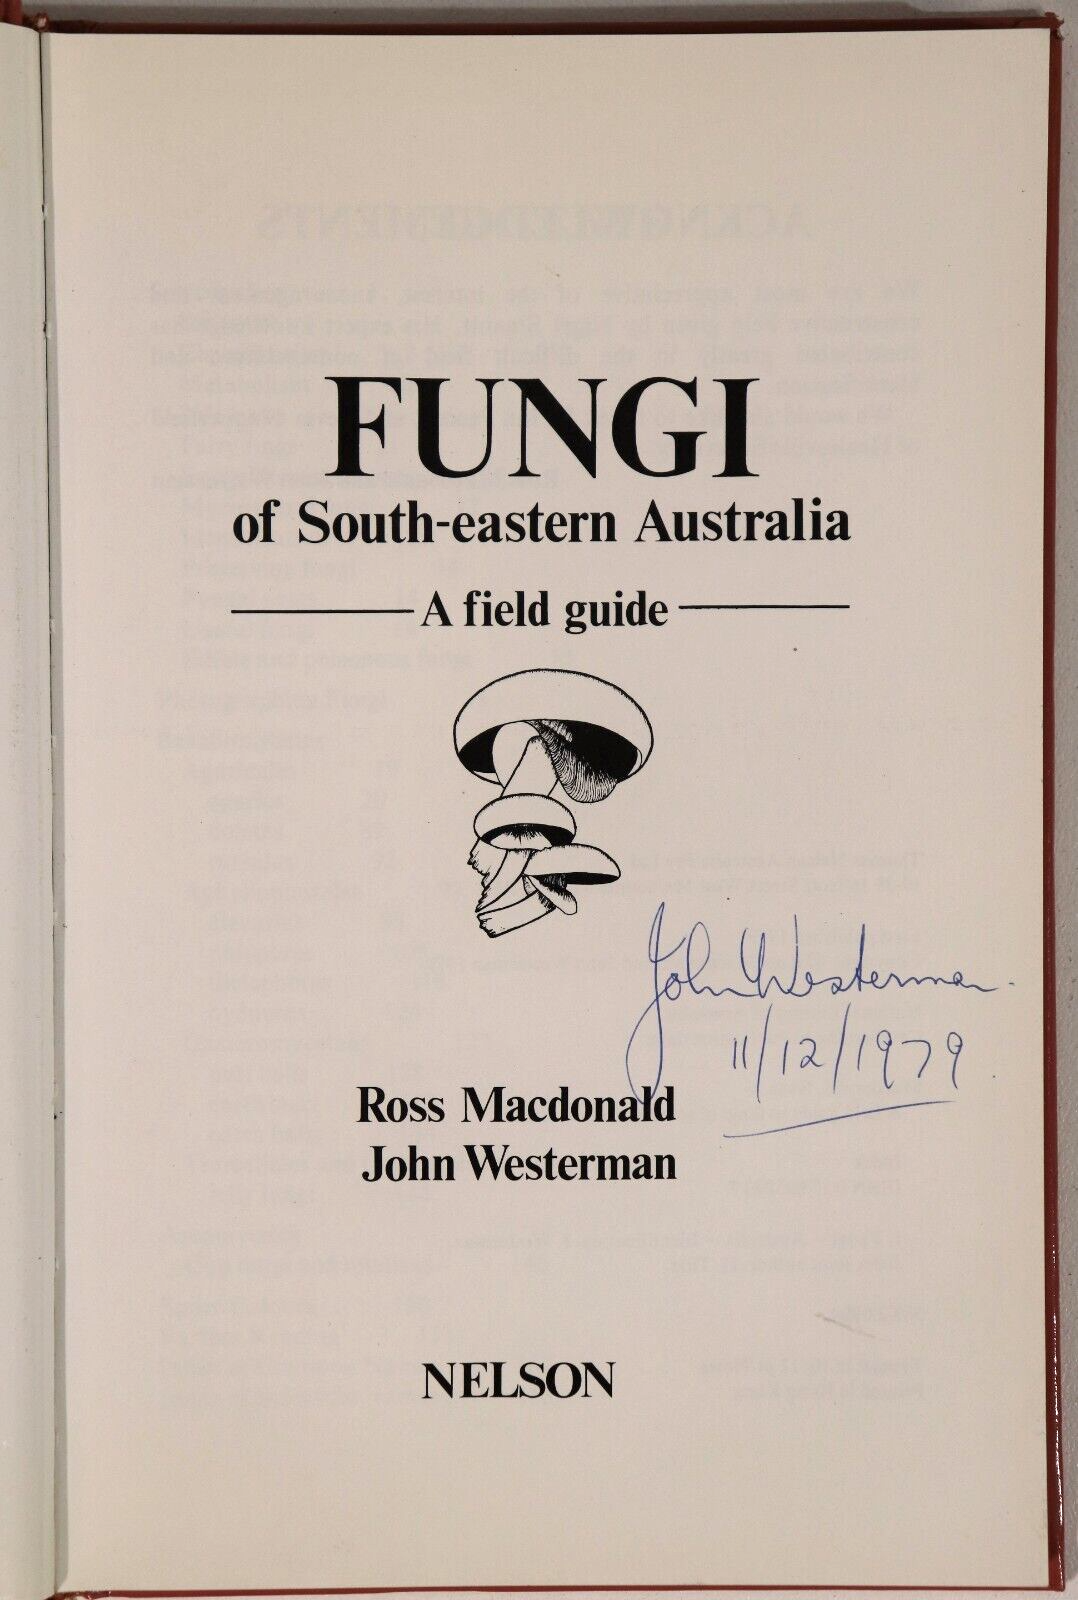 Fungi Of South Eastern Australia by MacDonald & Westerman - 1979 - Signed Book